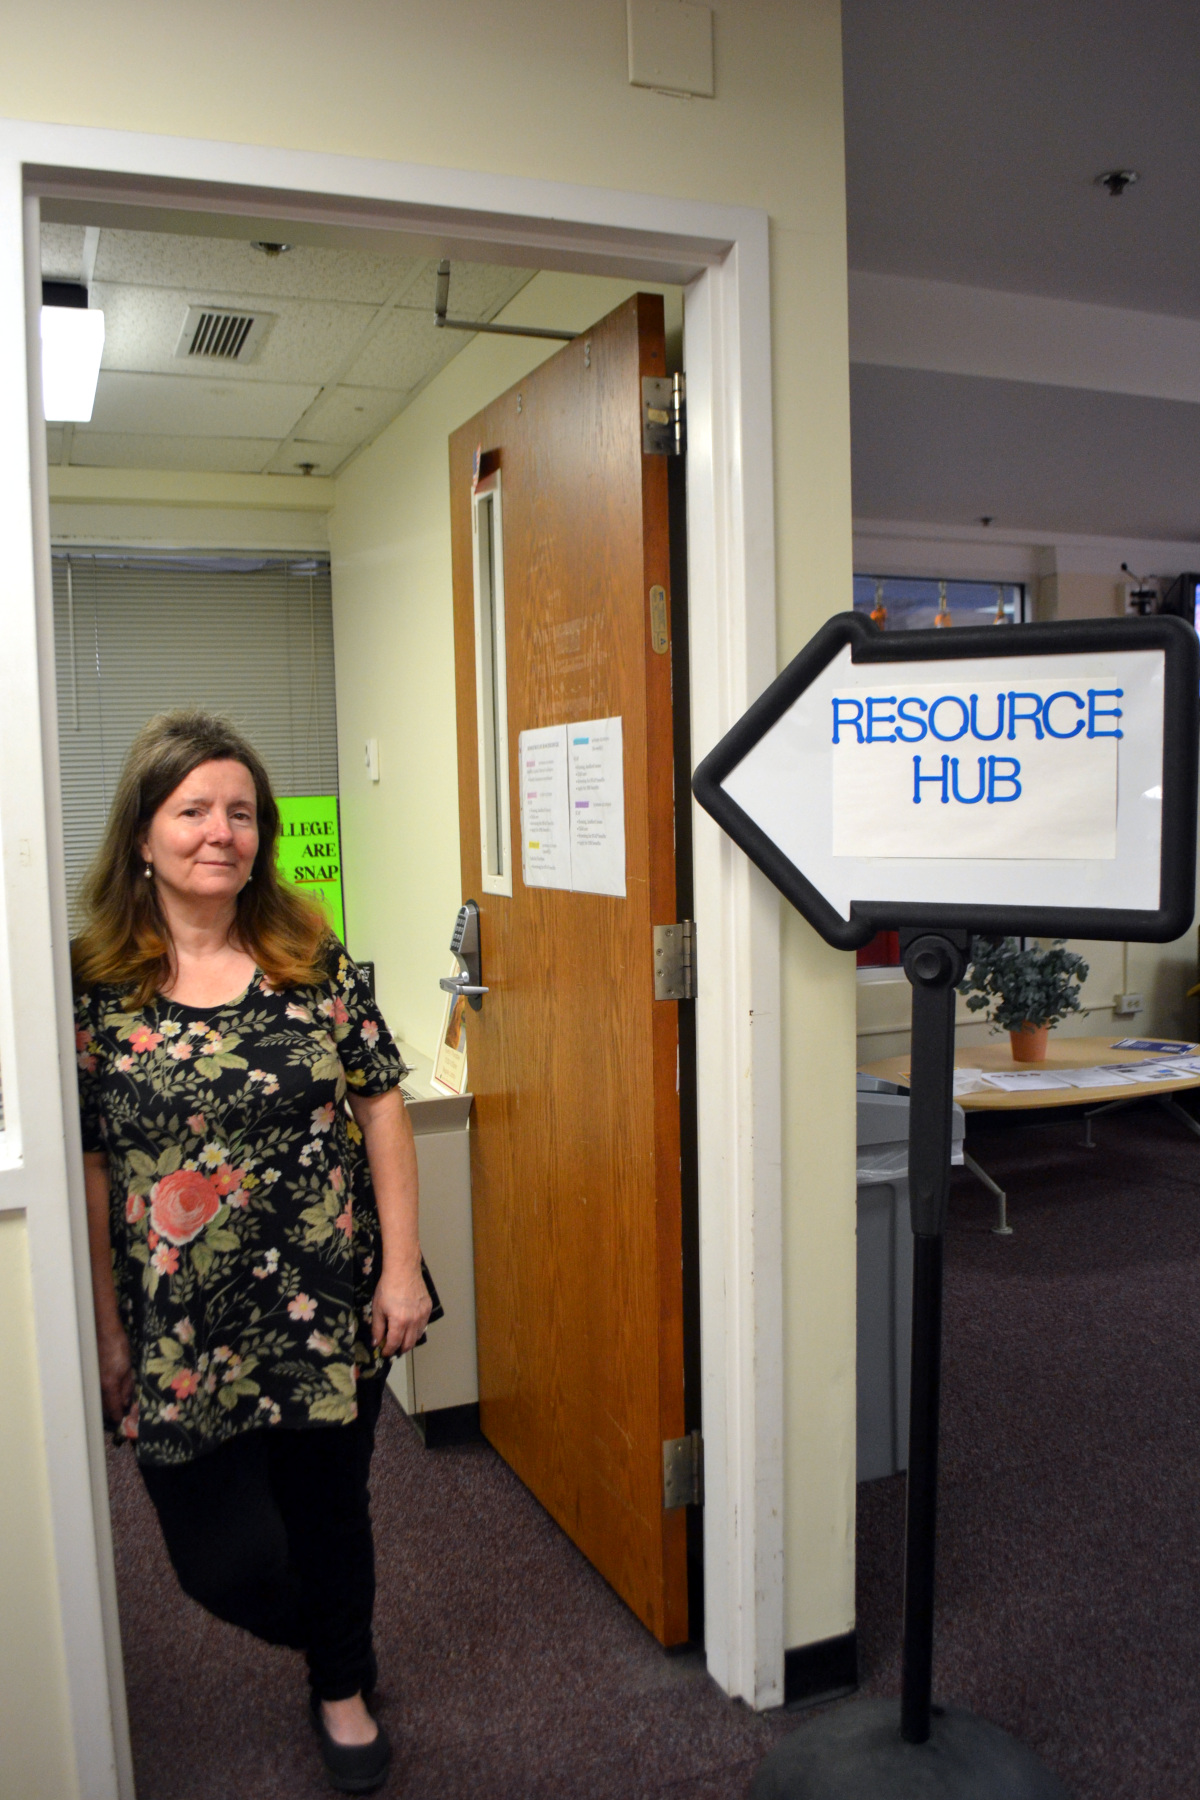 Robyn King standing in front of Resource Hub, Elston Hall, Second floor